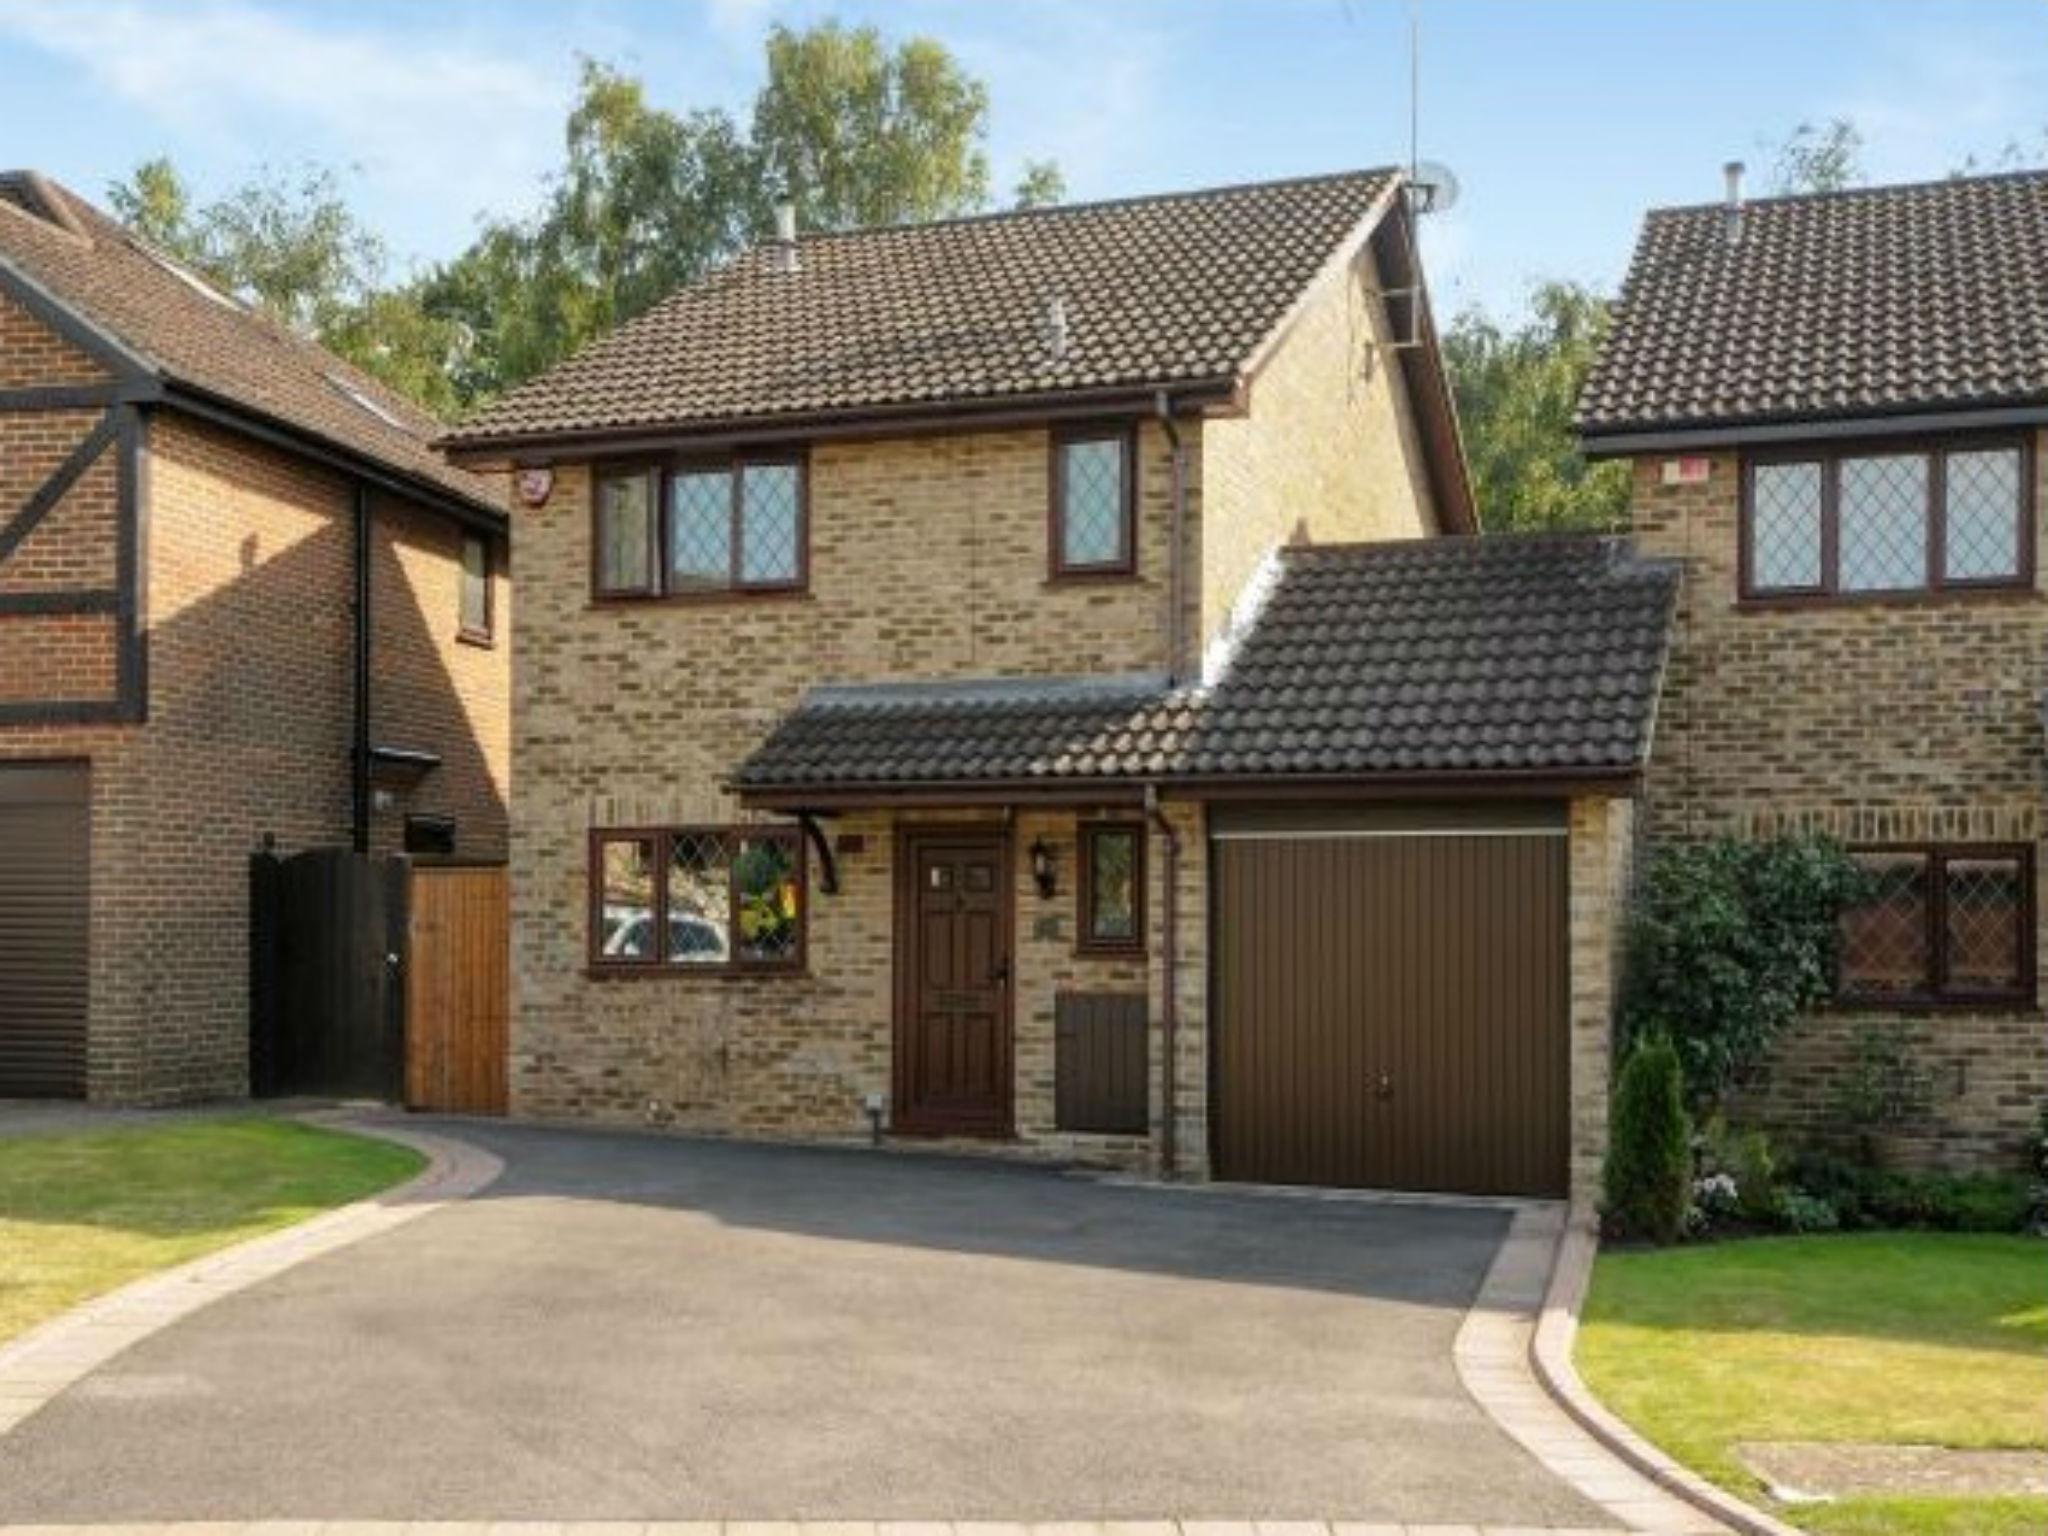 The real life 4 Privet Drive is actually a 3-bedroom house in Martins Heron, Bracknell